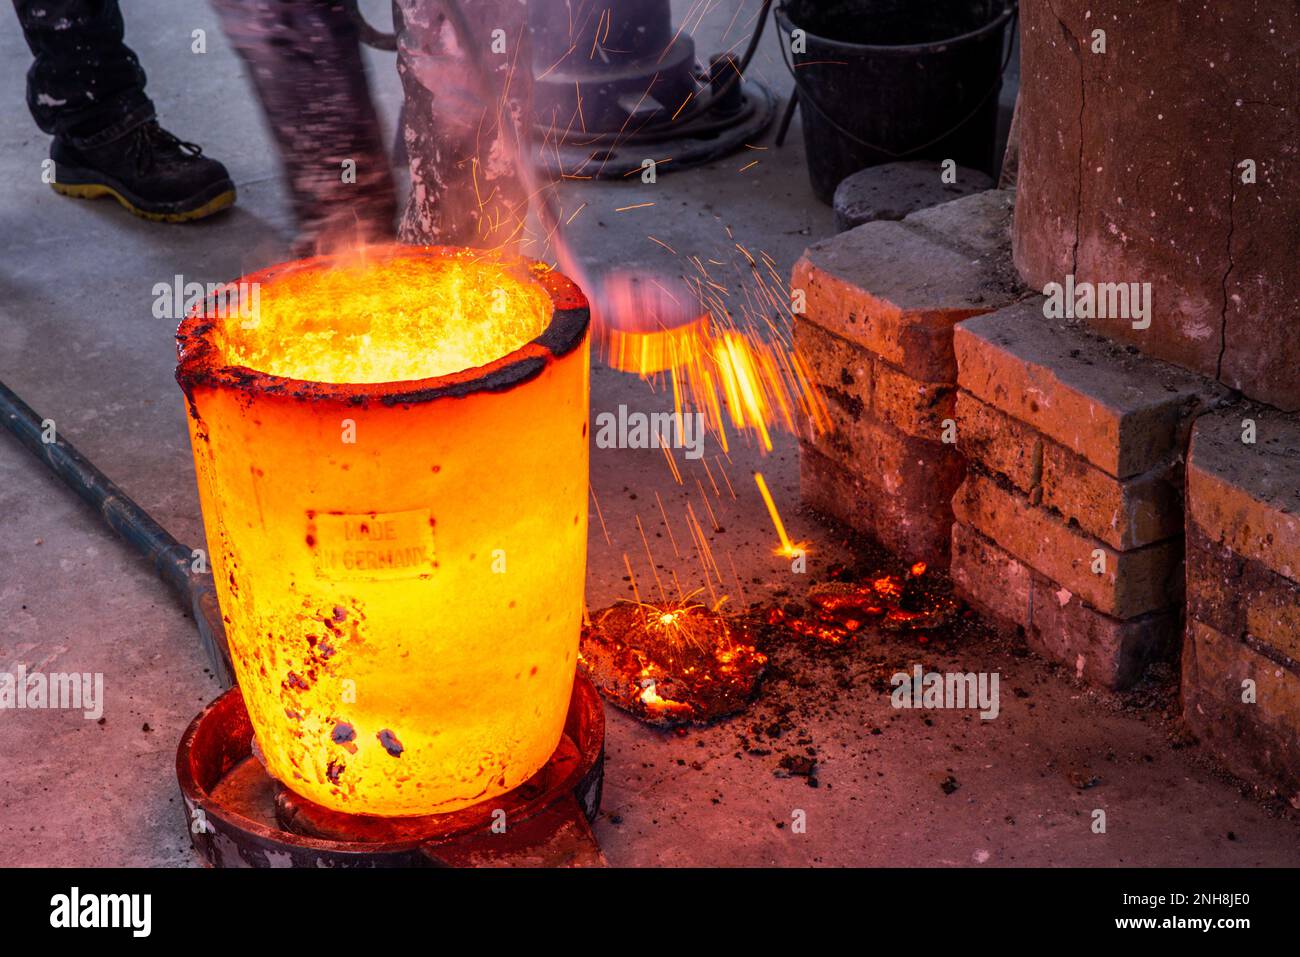 Ziesendorf, Germany. 21st Feb, 2023. Slag is skimmed off the molten bronze in a vessel at the Lachmann bronze image foundry. The molten metal is tipped into a mold to produce one of a total of eight individual parts of a Barlach monument. The Güstrow artist Henning Spitzer designed the bronze statue 'Homage to Ernst Barlach' back in 2016 and offered it to the city of Güstrow as a gift. The donation-financed sculpture, which is over two meters high, is to be erected as a monument in front of the Barlach Theater in May 2023. Credit: Jens Büttner/dpa/Alamy Live News Stock Photo